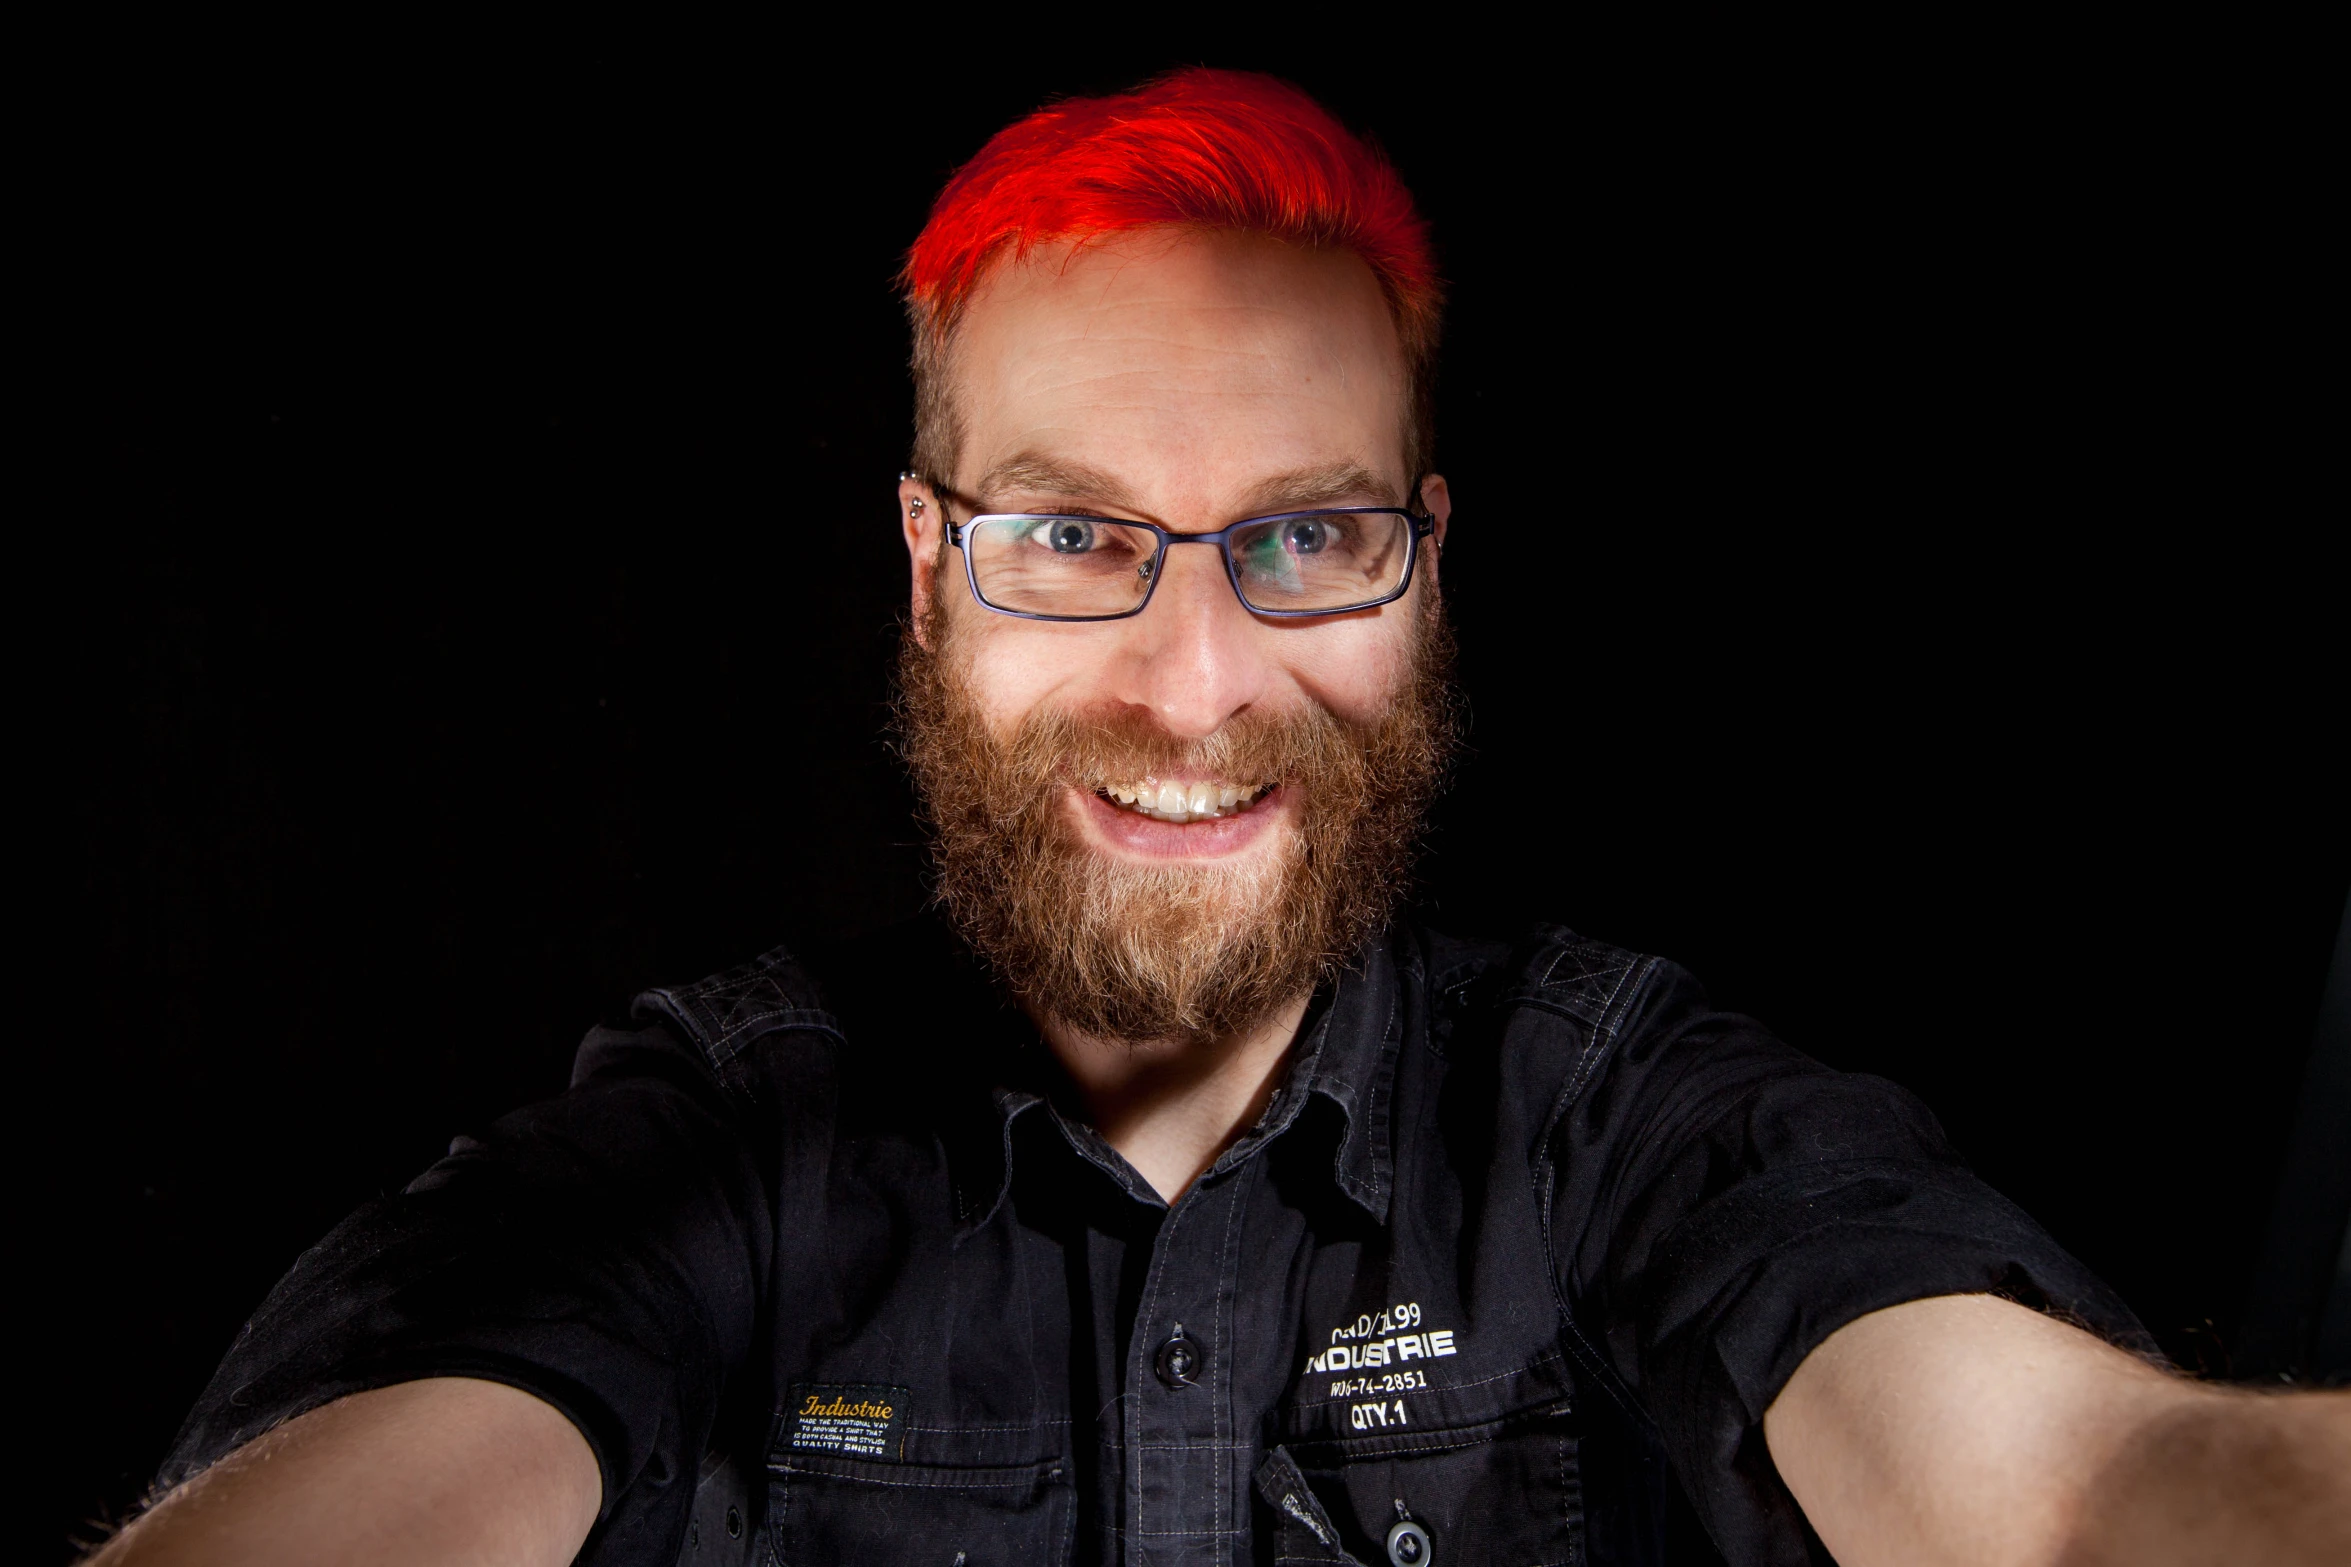 a close up of a person with a red hair and glasses